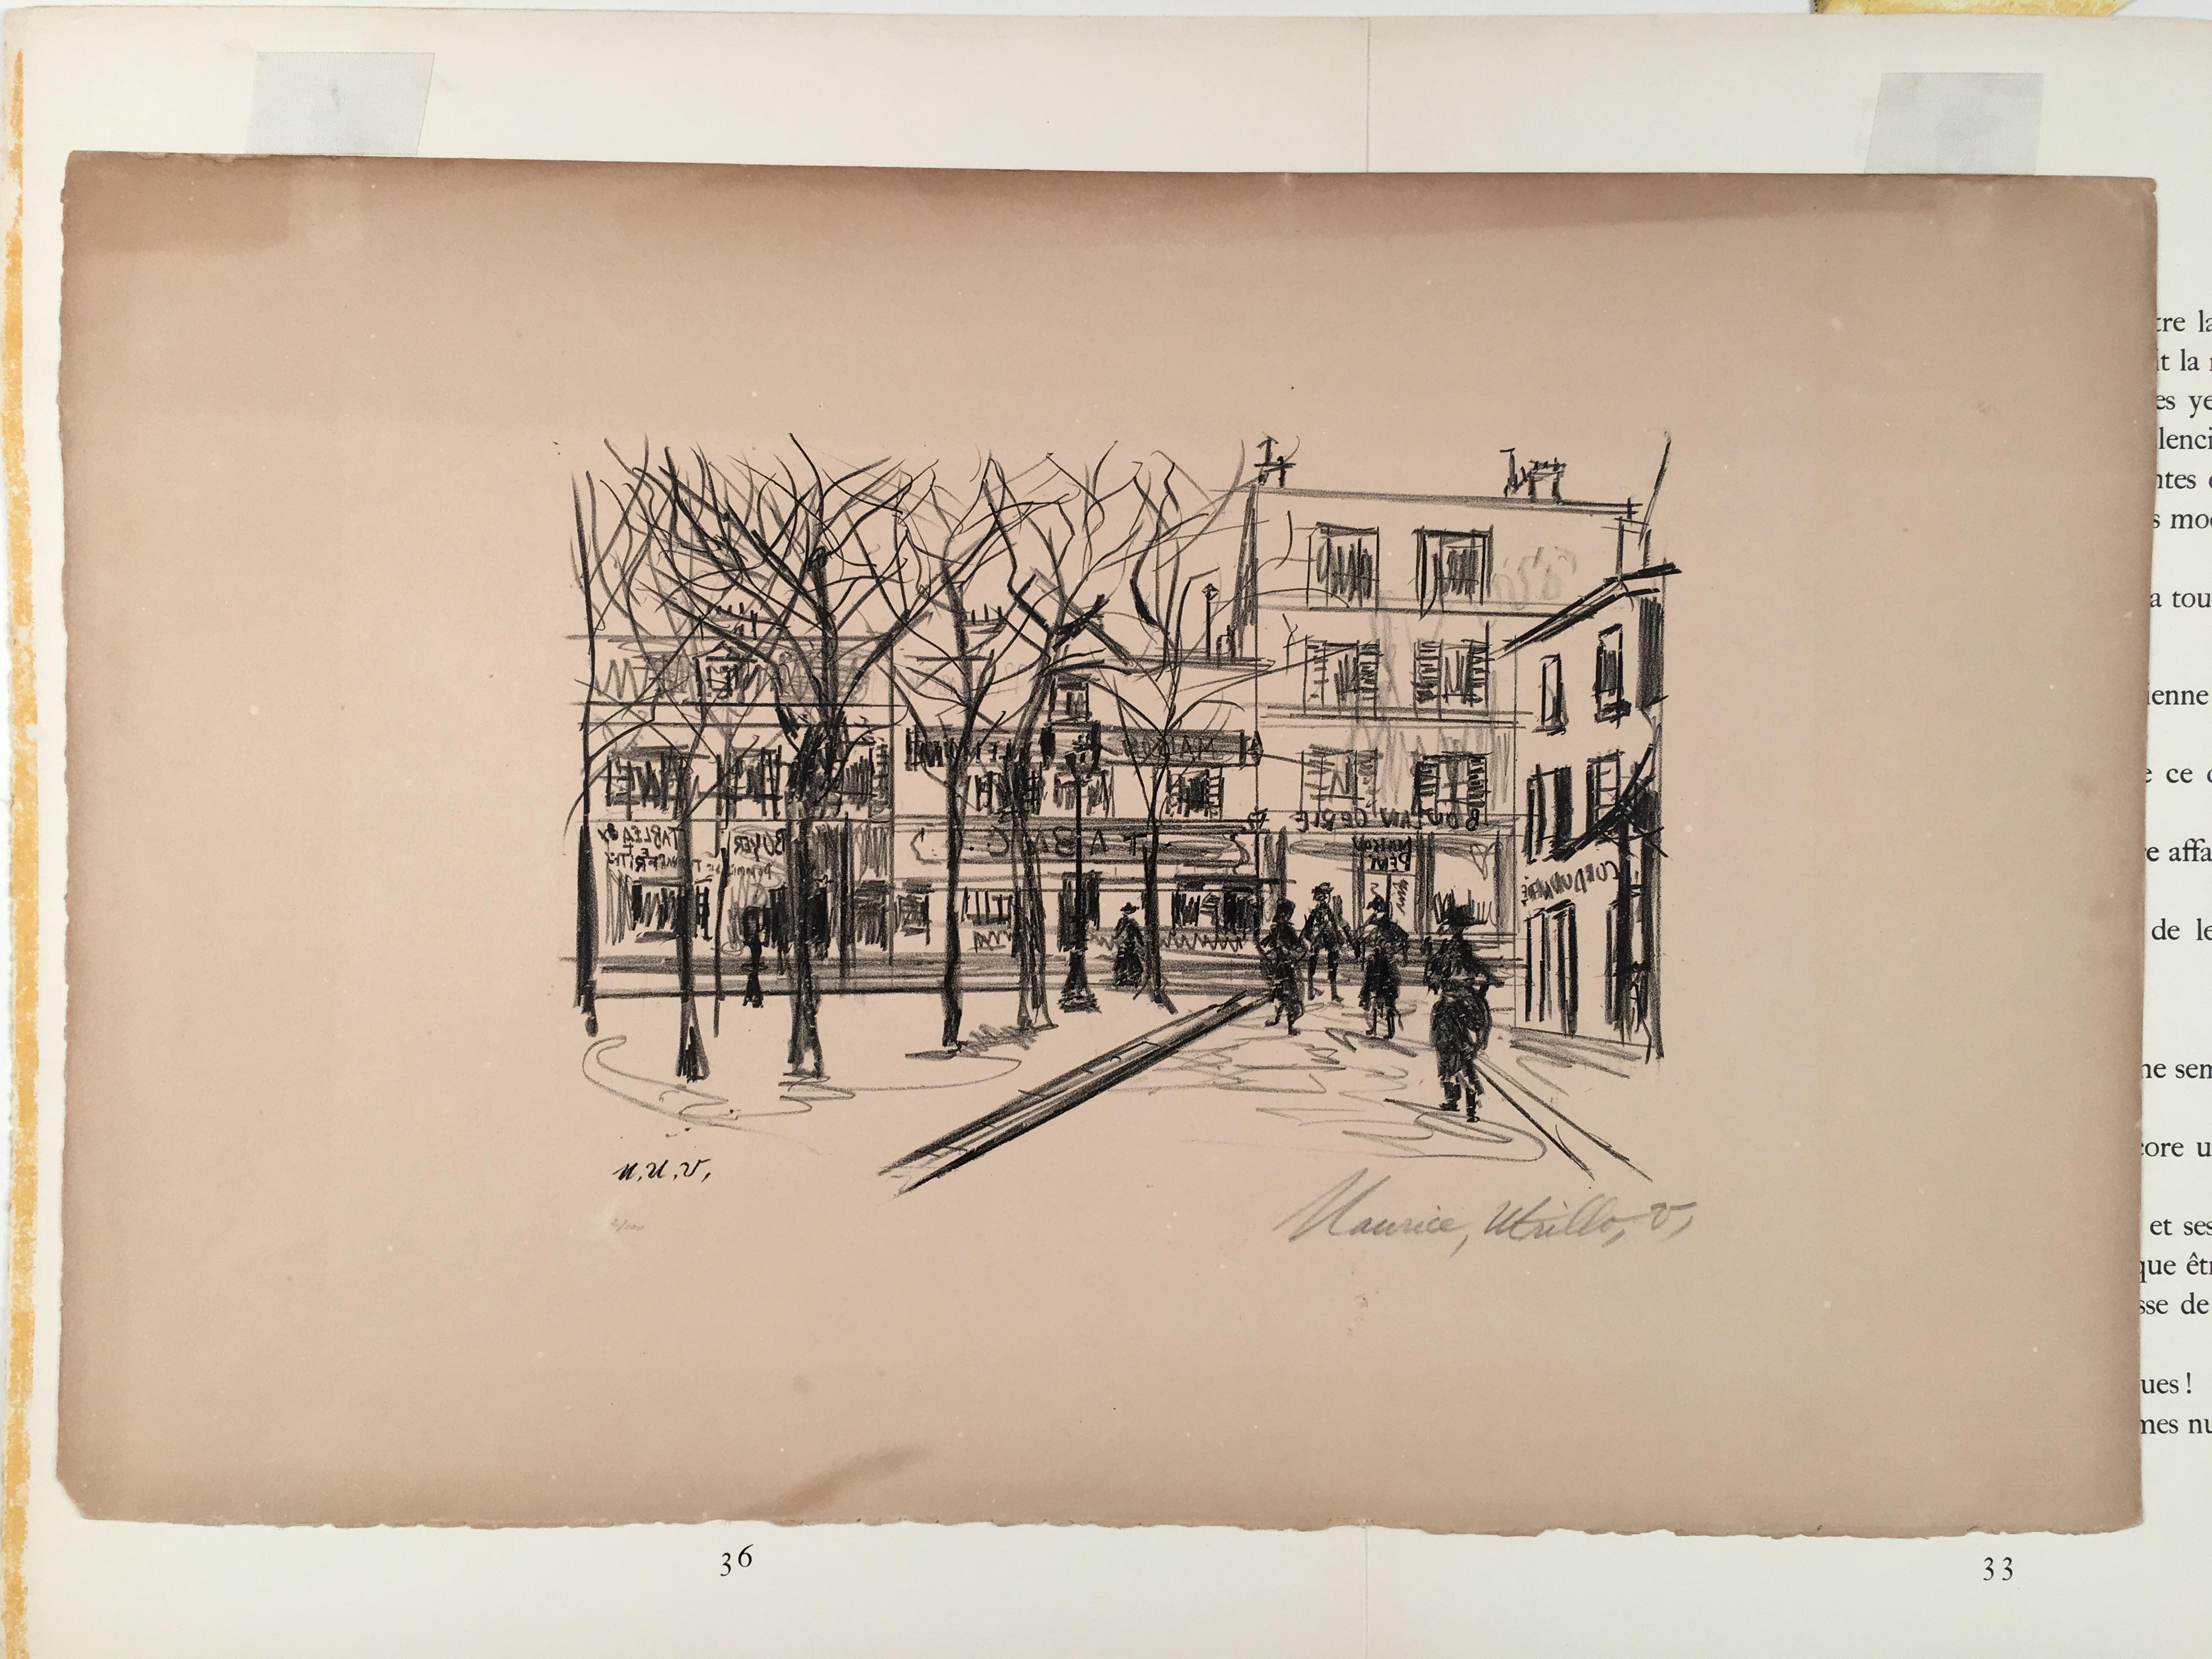 Maurice Utrillo, original, pencil signed and numbered (2/100) lithograph, ca. 1925.

Maurice Utrillo (born Maurice Valadon, 1883 – 1955), was a French painter who specialized in cityscapes. Born in the Montmartre quarter of Paris, France, Utrillo is